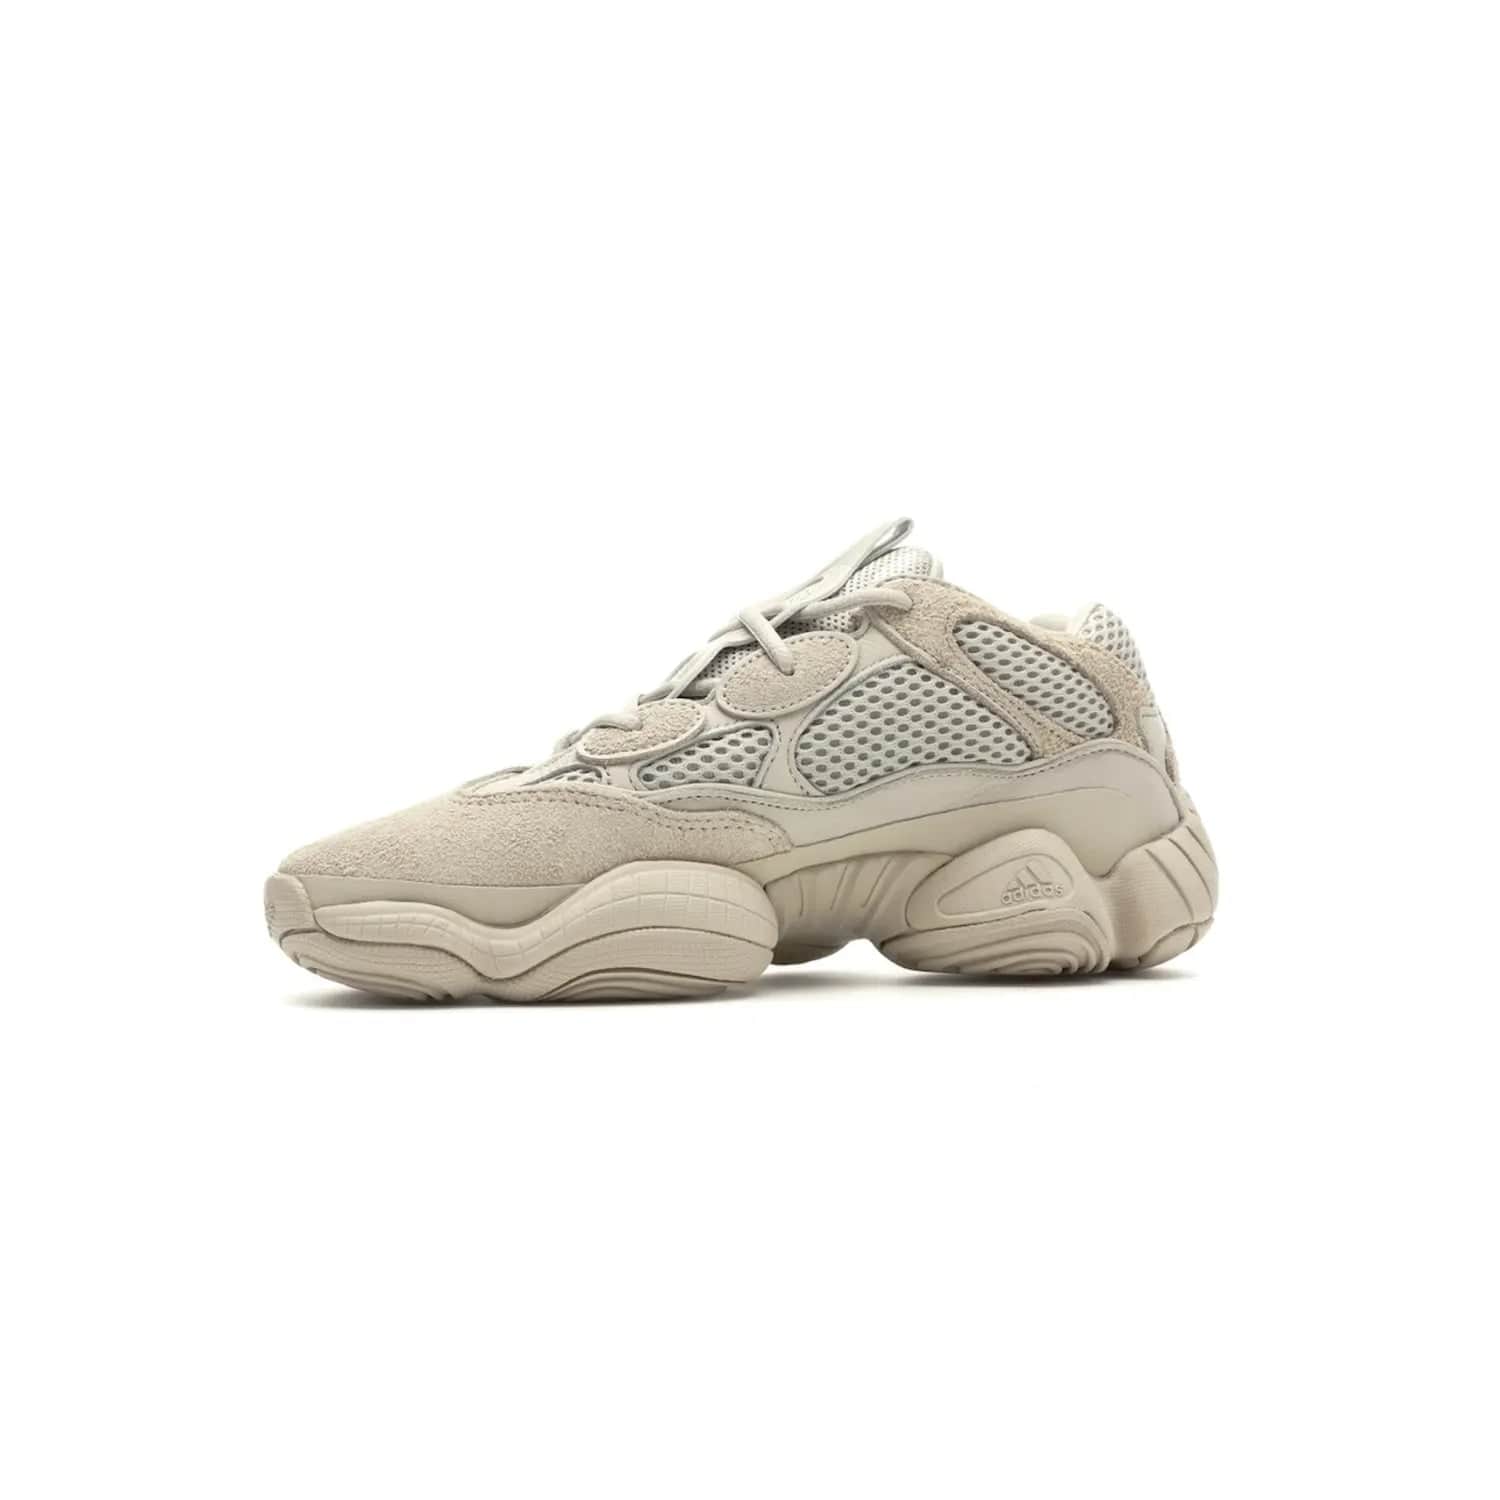 adidas Yeezy 500 Blush - Image 17 - Only at www.BallersClubKickz.com - Step up your sneaker game with the Adidas Yeezy 500 Blush. Monochromatic pale pink palette, hiking-inspired suede/mesh construction, plus adiPRENE sole for comfort and performance. Get the Adidas Yeezy 500 and experience true style and comfort.